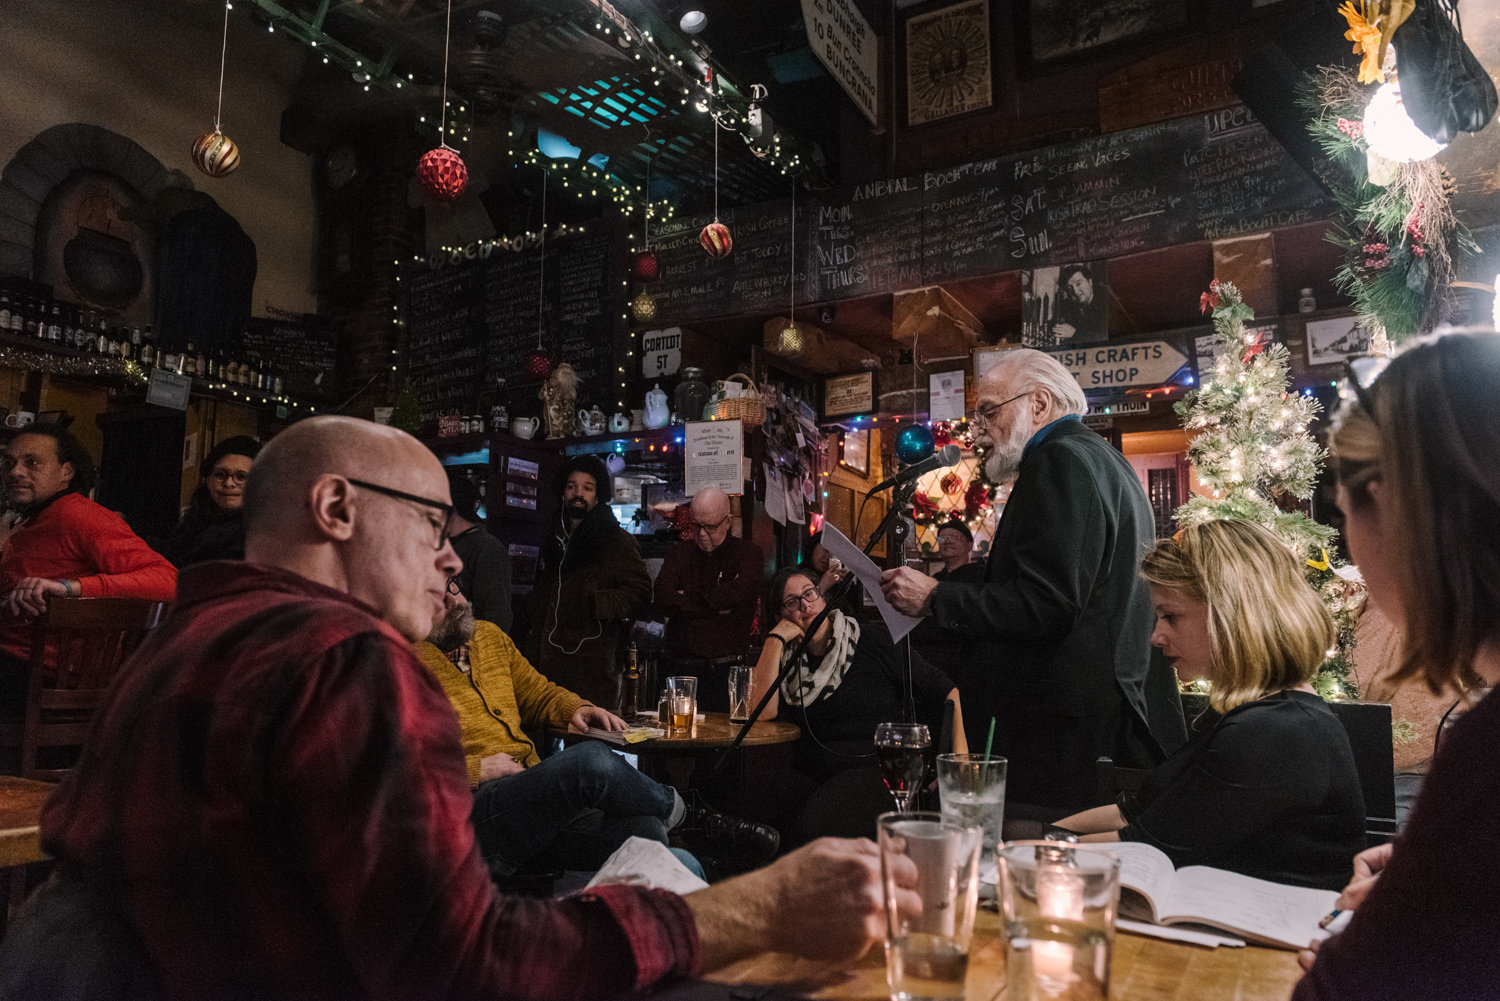 The Poor Mouth Theatre Company brings together poets and poetry aficionados alike for the 10-year anniversary of its writer’s night at An Beal Bocht Cafe.